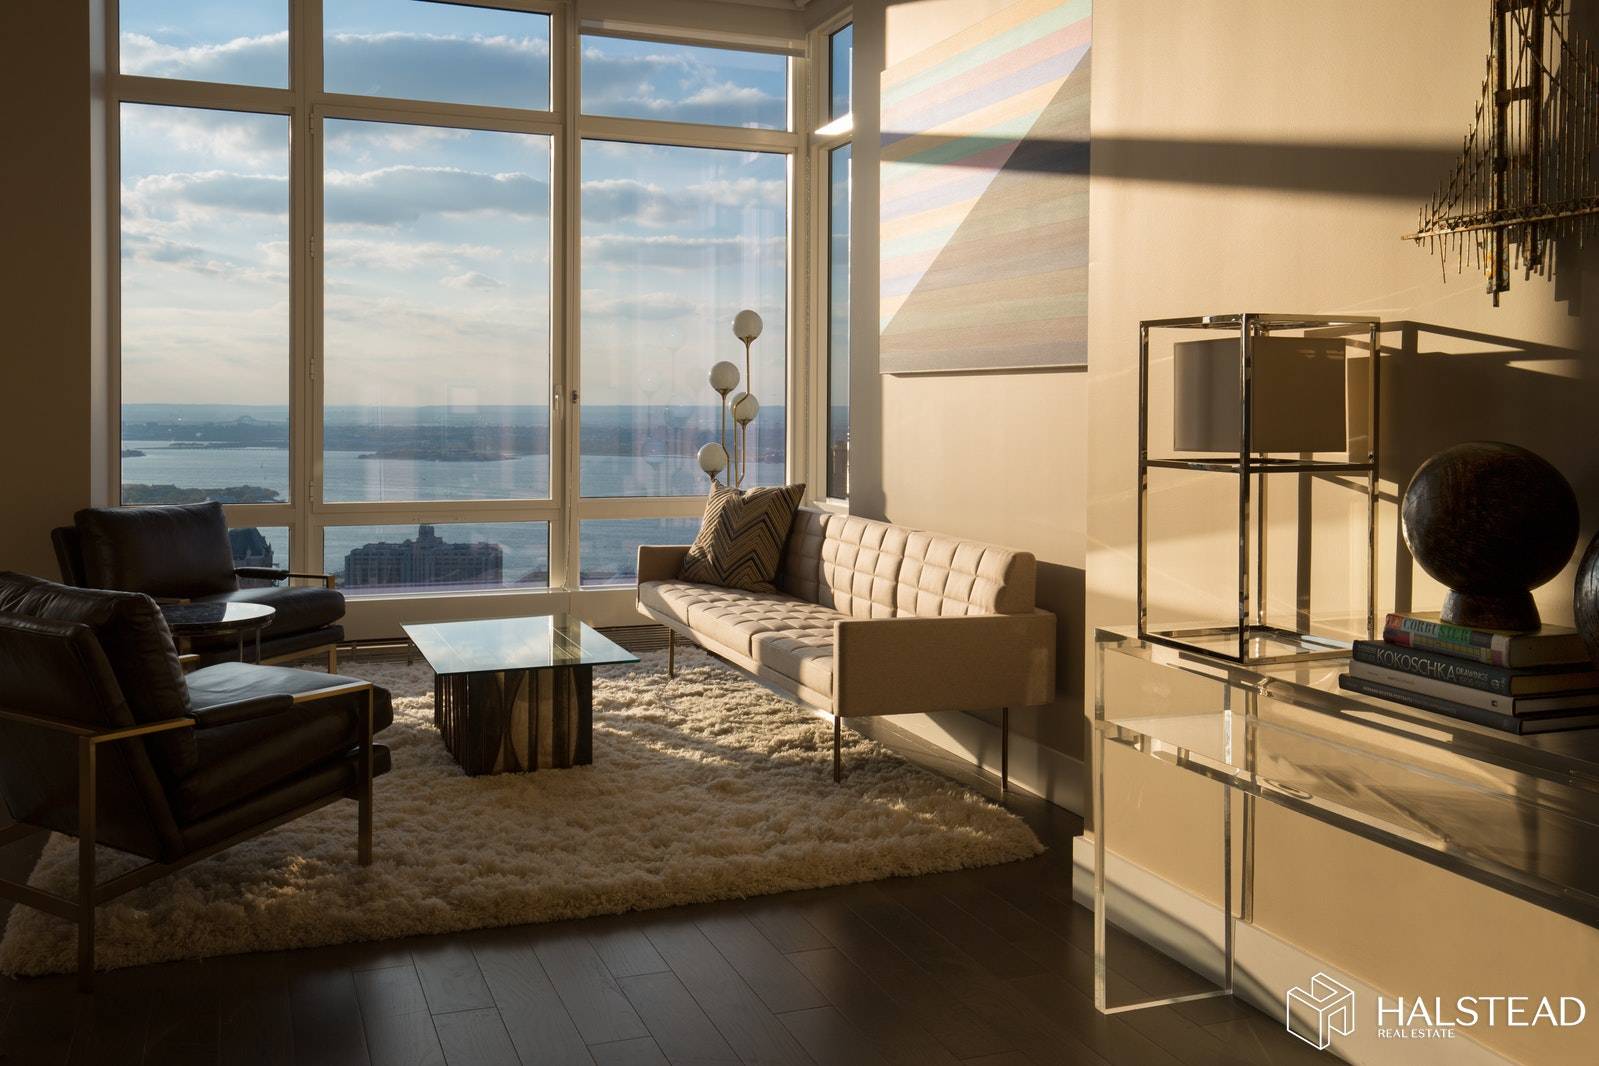 Available April 15. Duplex Penthouse at 388 Bridge is offering 1646 square feet of living space, a private terrace and amazing views of New York City City, river and Statue ...